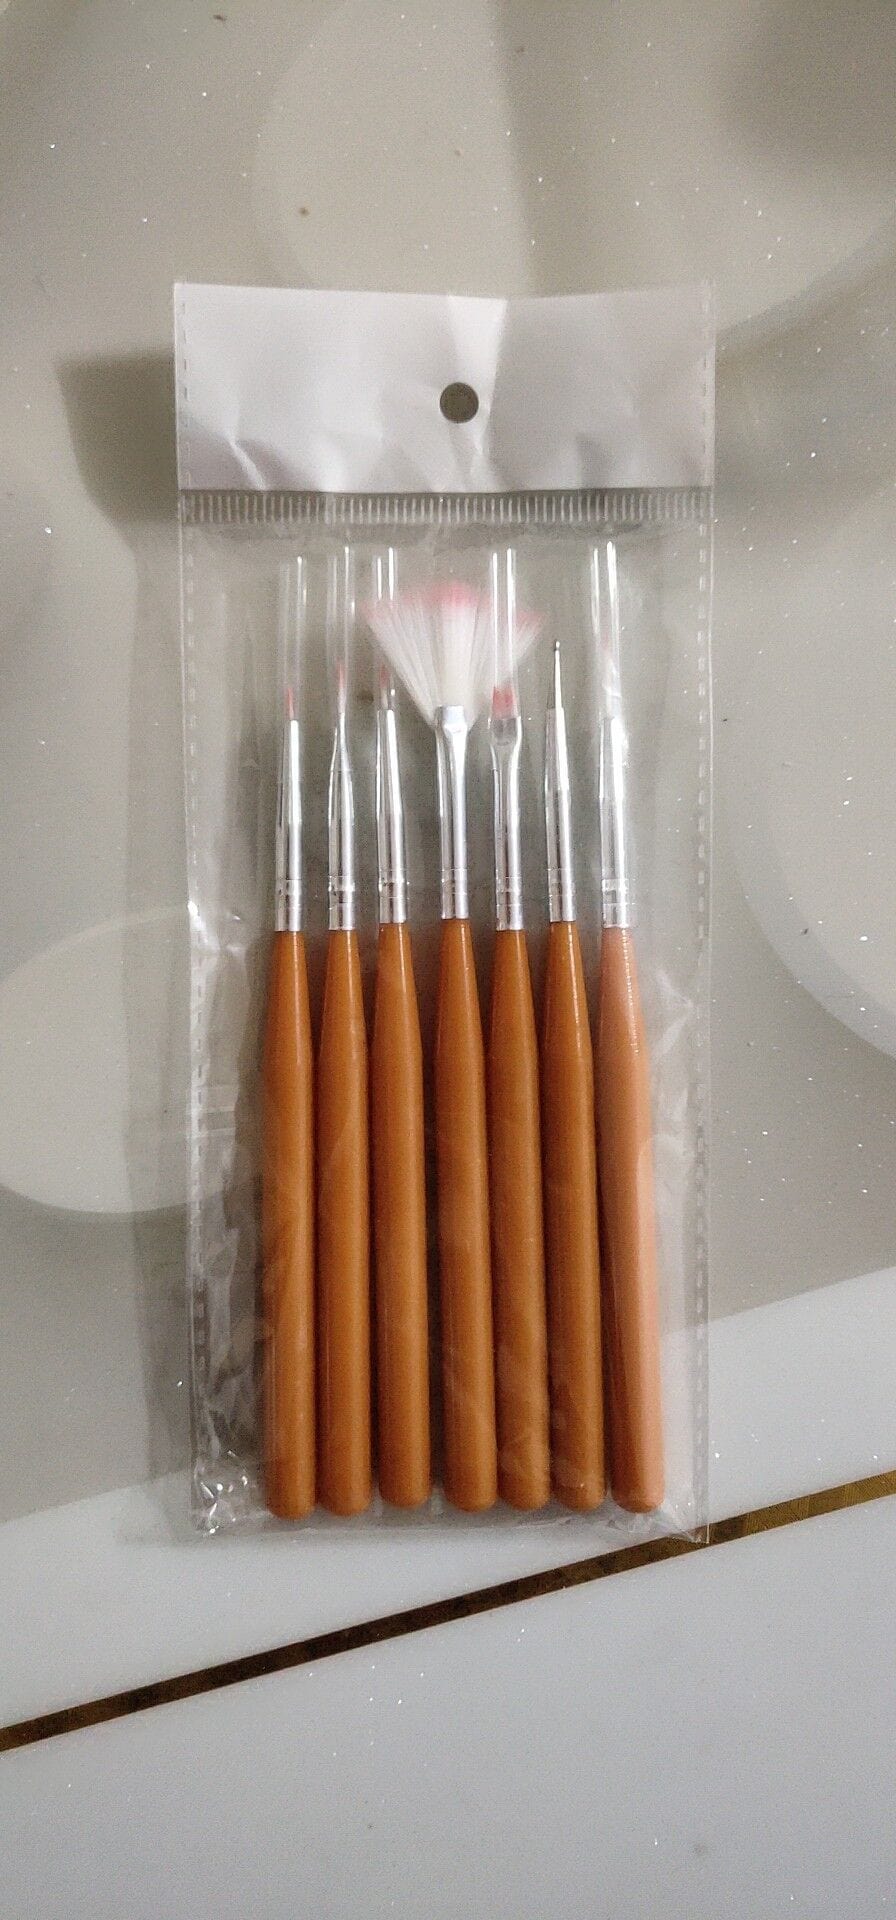 Manufacturers supply 7 round sticks nail poles set painted pen drawing pen painting flower pen carved pen point drill